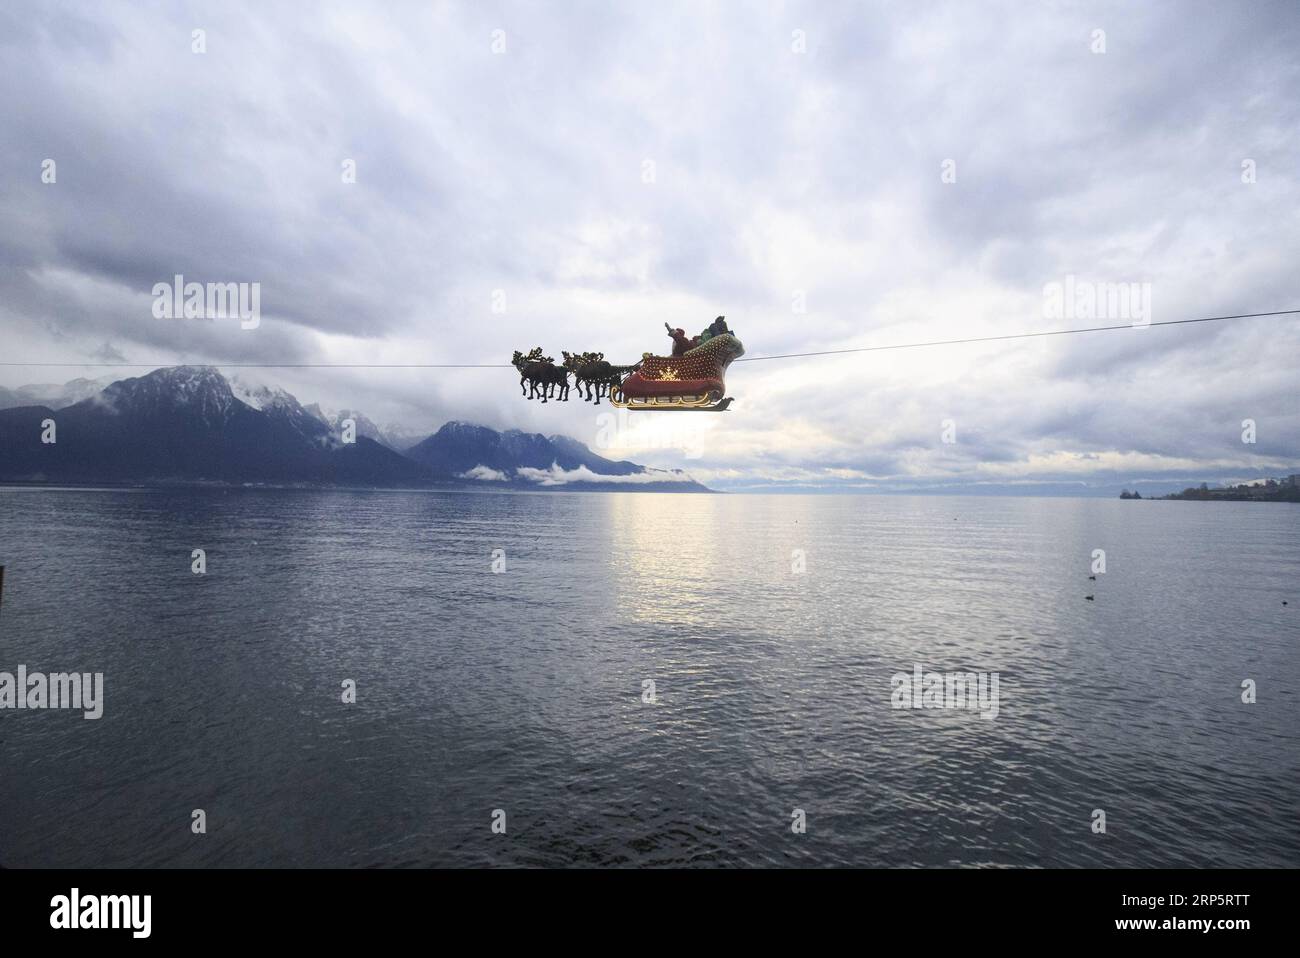 (181222) -- MONTREUX (SWITZERLAND), Dec. 22, 2018 -- A Santa Claus waves to the crowd from his flying sleigh drawn by reindeers over Lake Leman at sunset in Montreux, Switzerland, on Dec. 22, 2018. The flying Santa Claus stunt show is part of promotional activities by the Christmas market in Montreux, which is one of the most famous and biggest markets of its kind in Switzerland. ) SWITZERLAND-MONTREUX-SANTA CLAUS-FLYING SLEIGH XuxJinquan PUBLICATIONxNOTxINxCHN Stock Photo